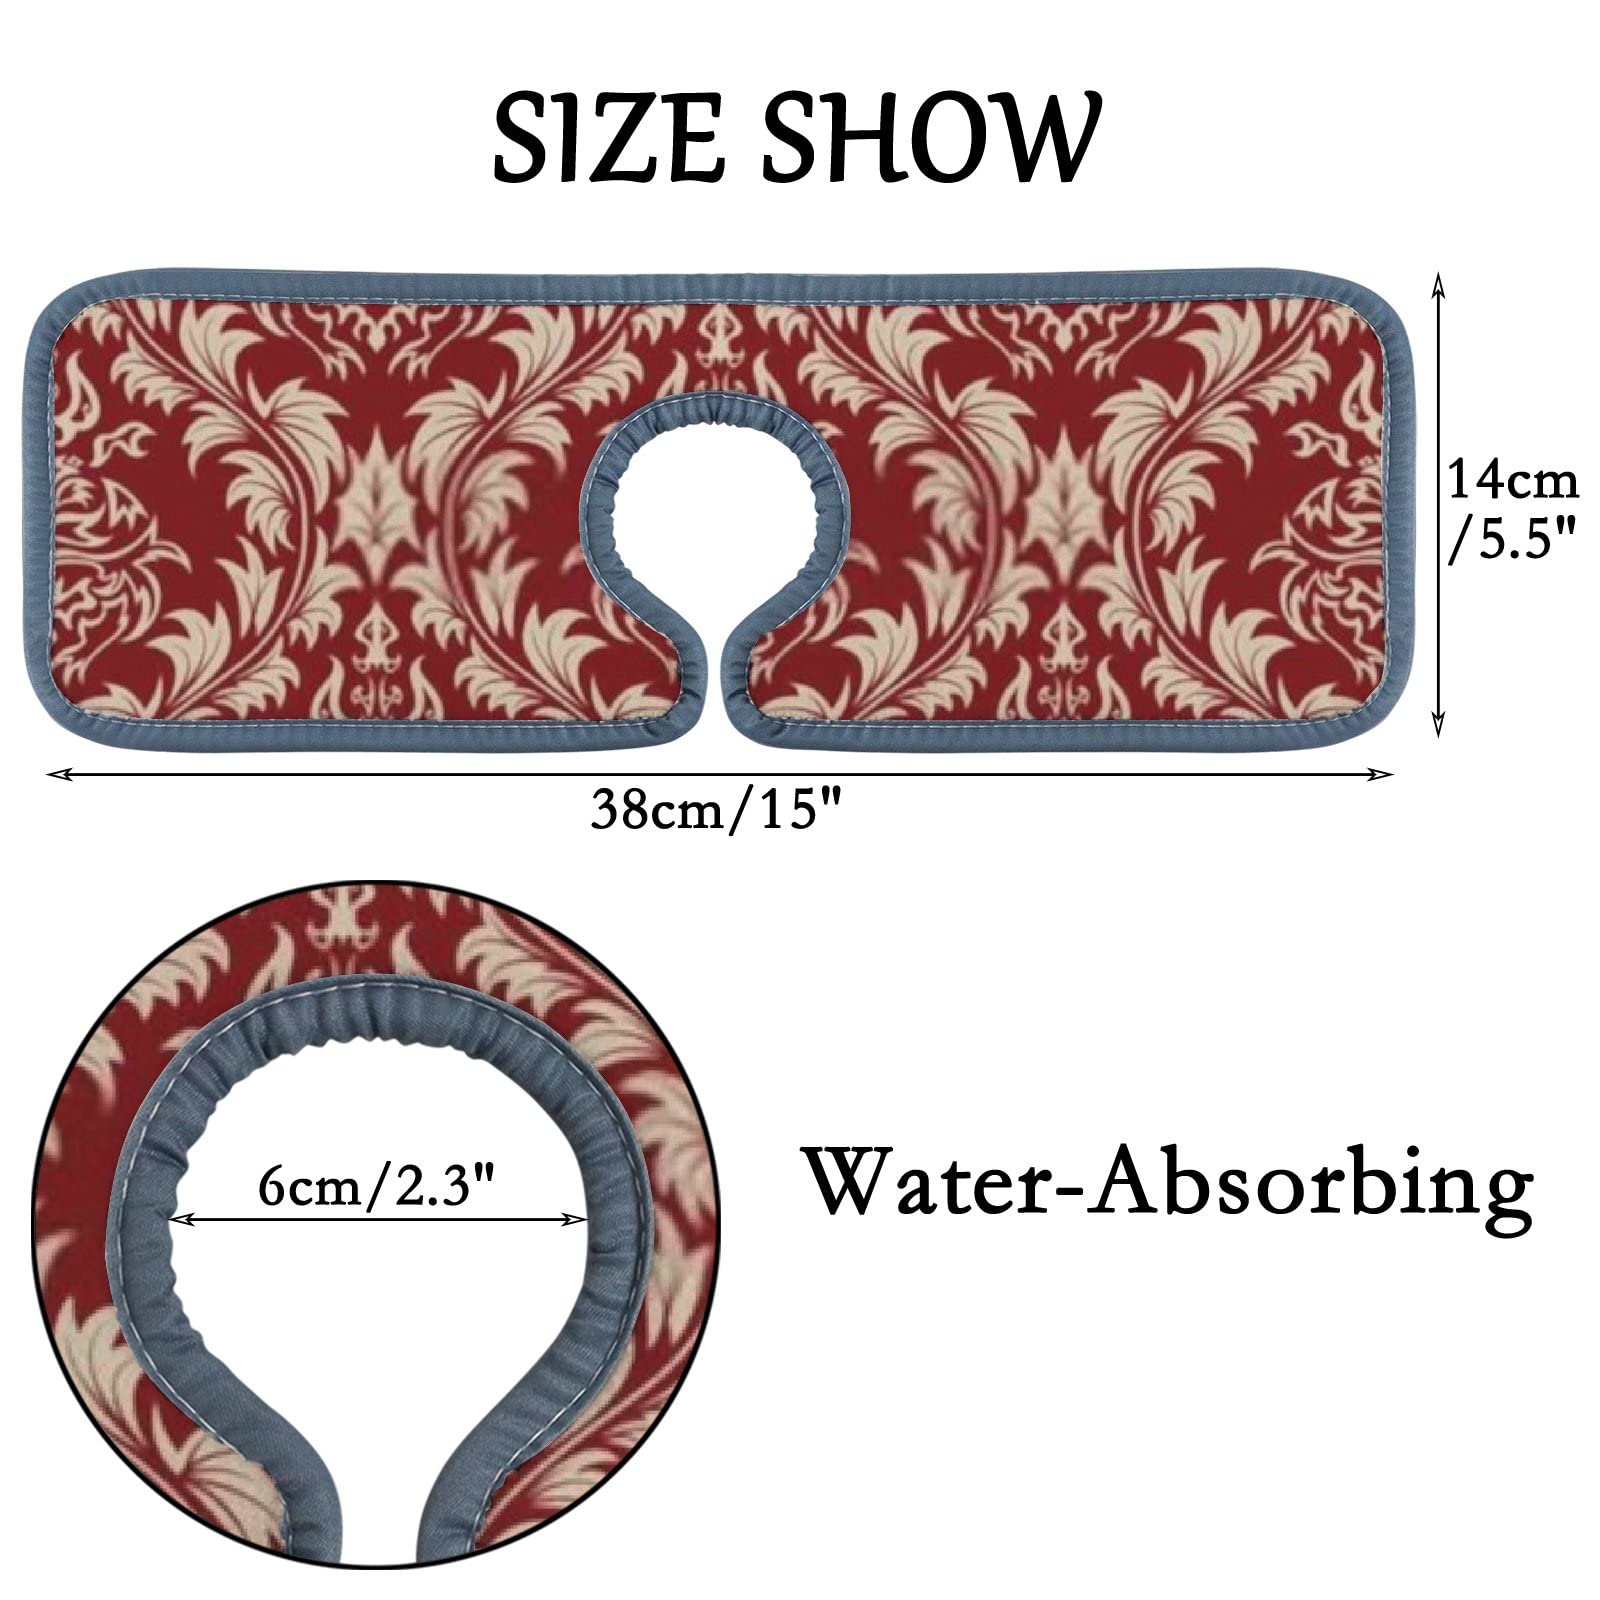 Kitchen Faucet Absorbent Mat 3 Pieces Red Paisley Damask Theme Faucet Sink Splash Guard Bathroom Counter and RV,Faucet Counter Sink Water Stains Preventer